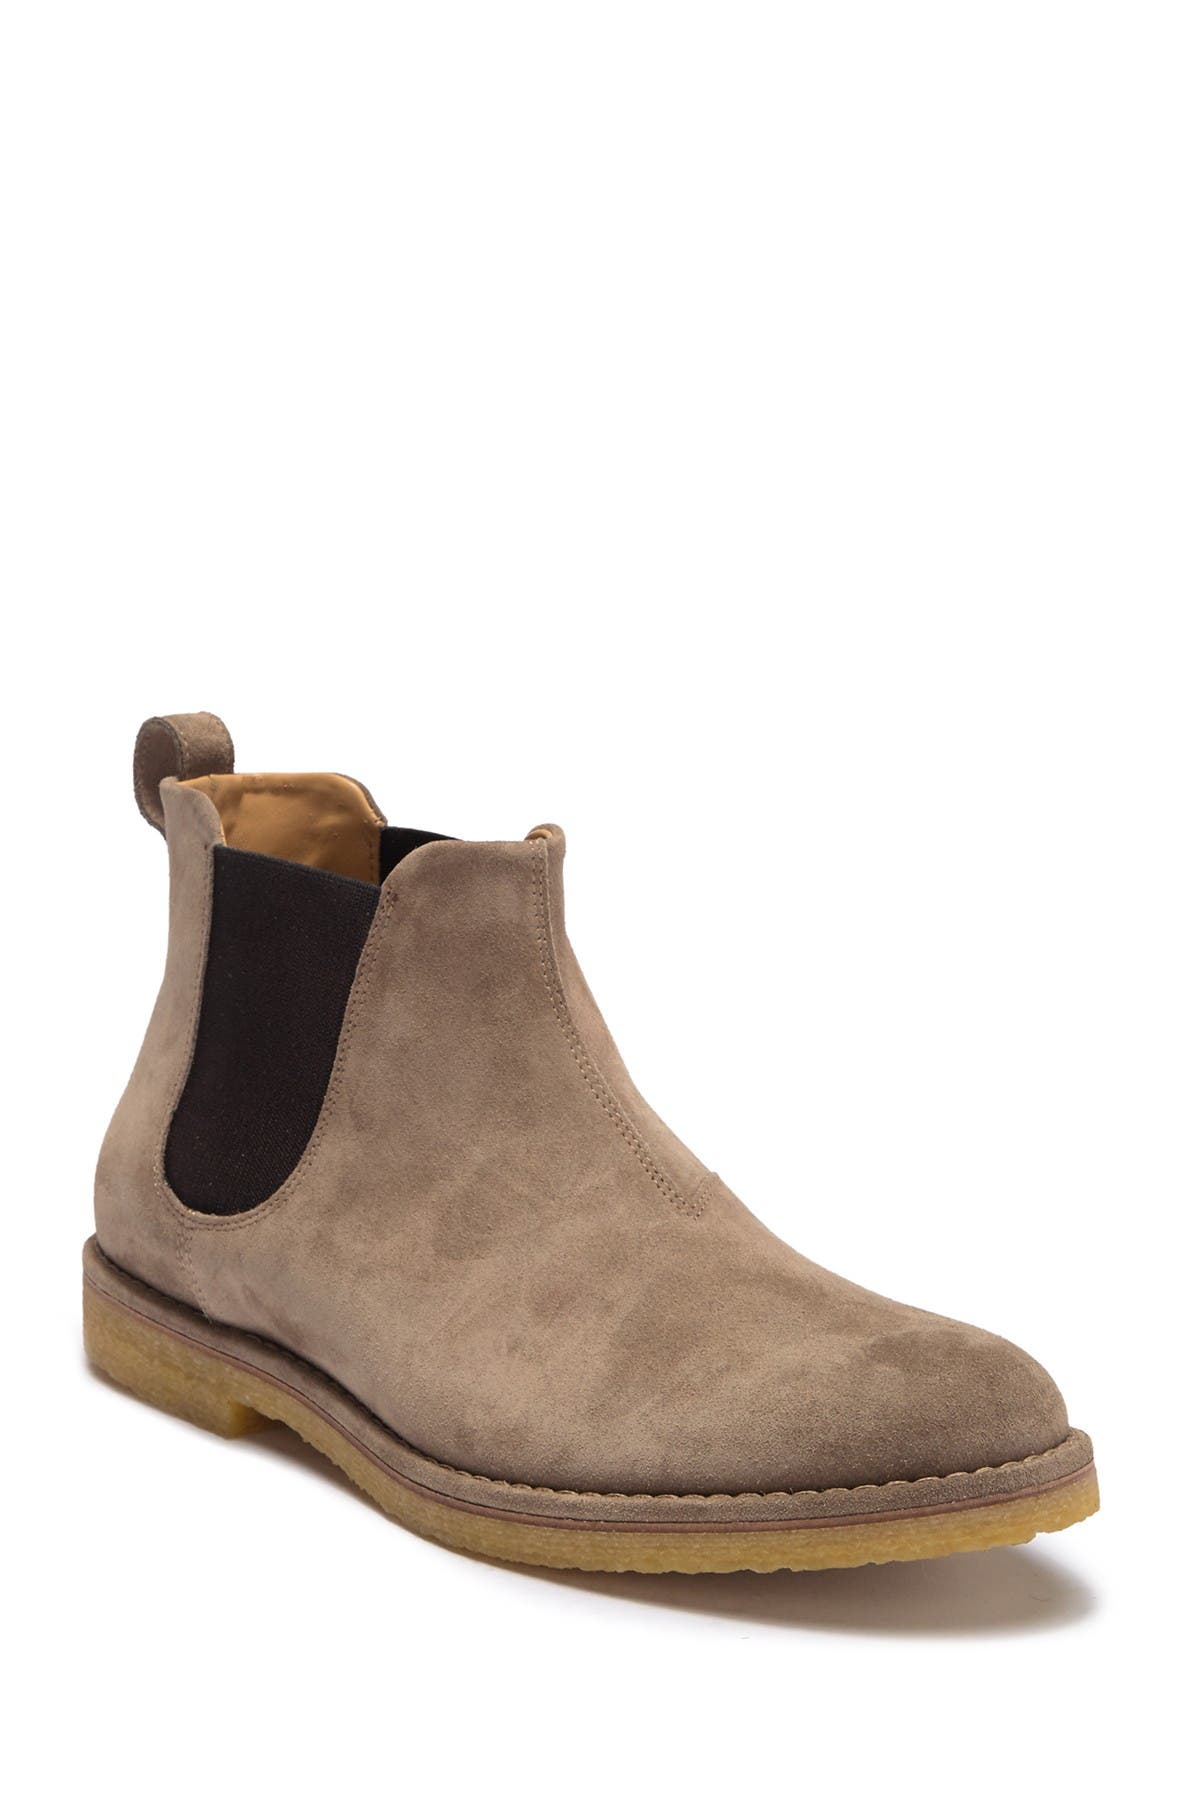 Vince | Sawyer Suede Chelsea Boot 